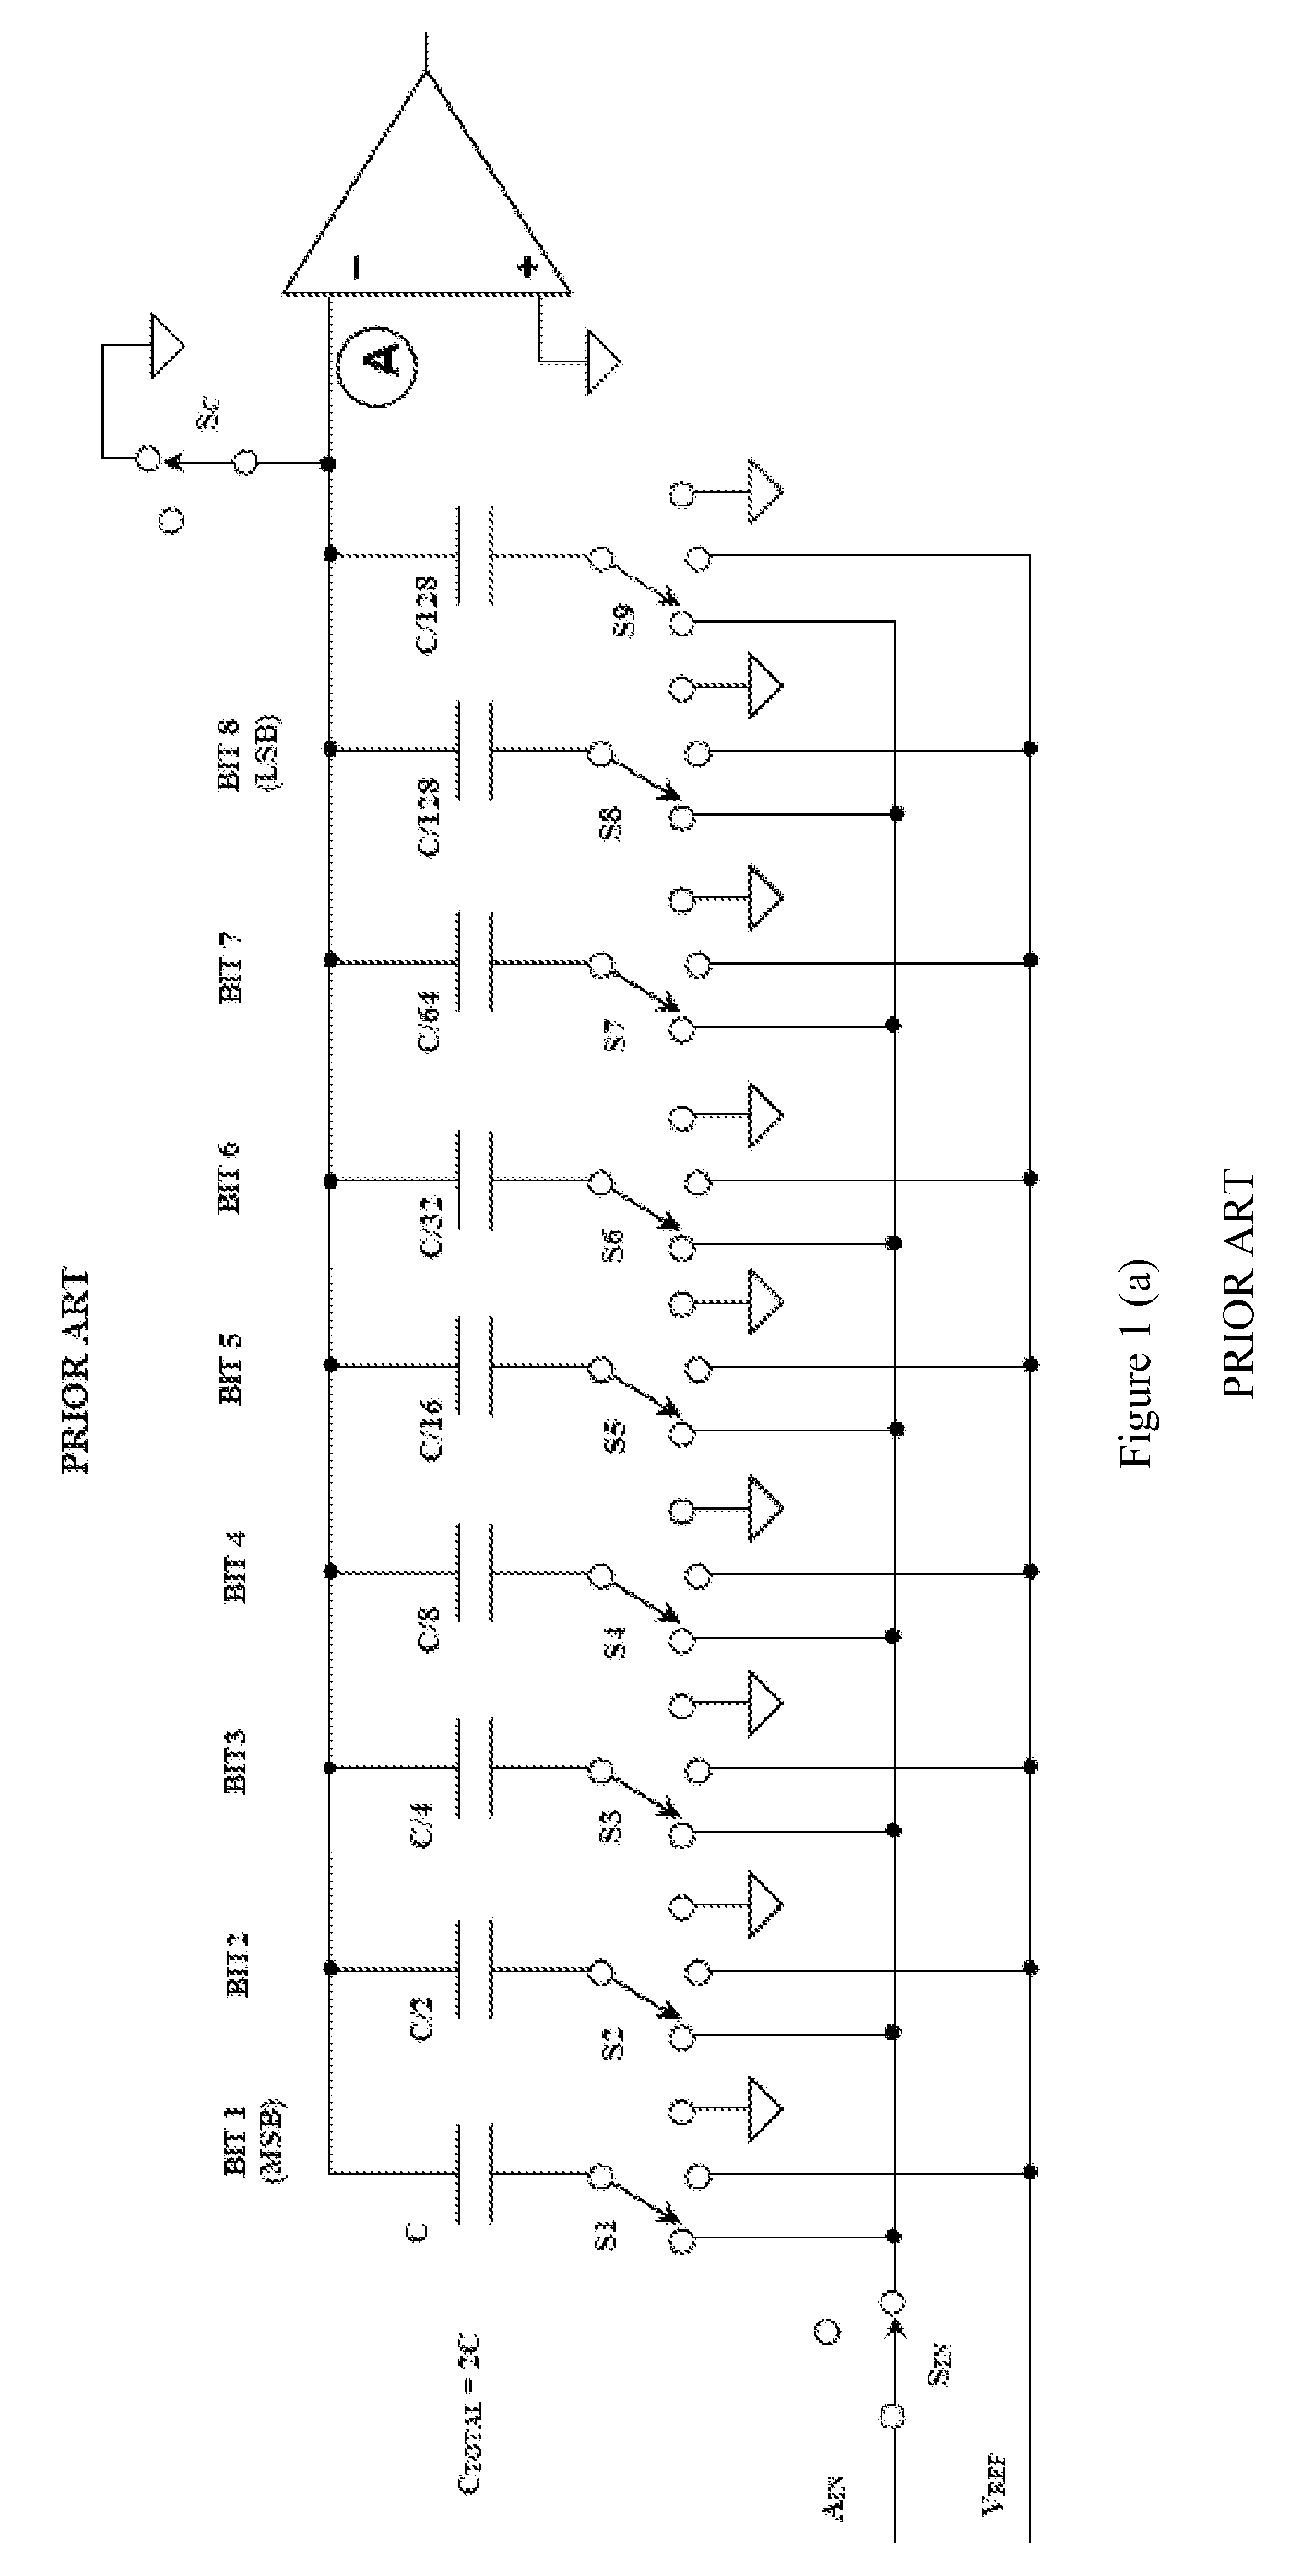 Method to display images on a display device using bit slice addressing technique